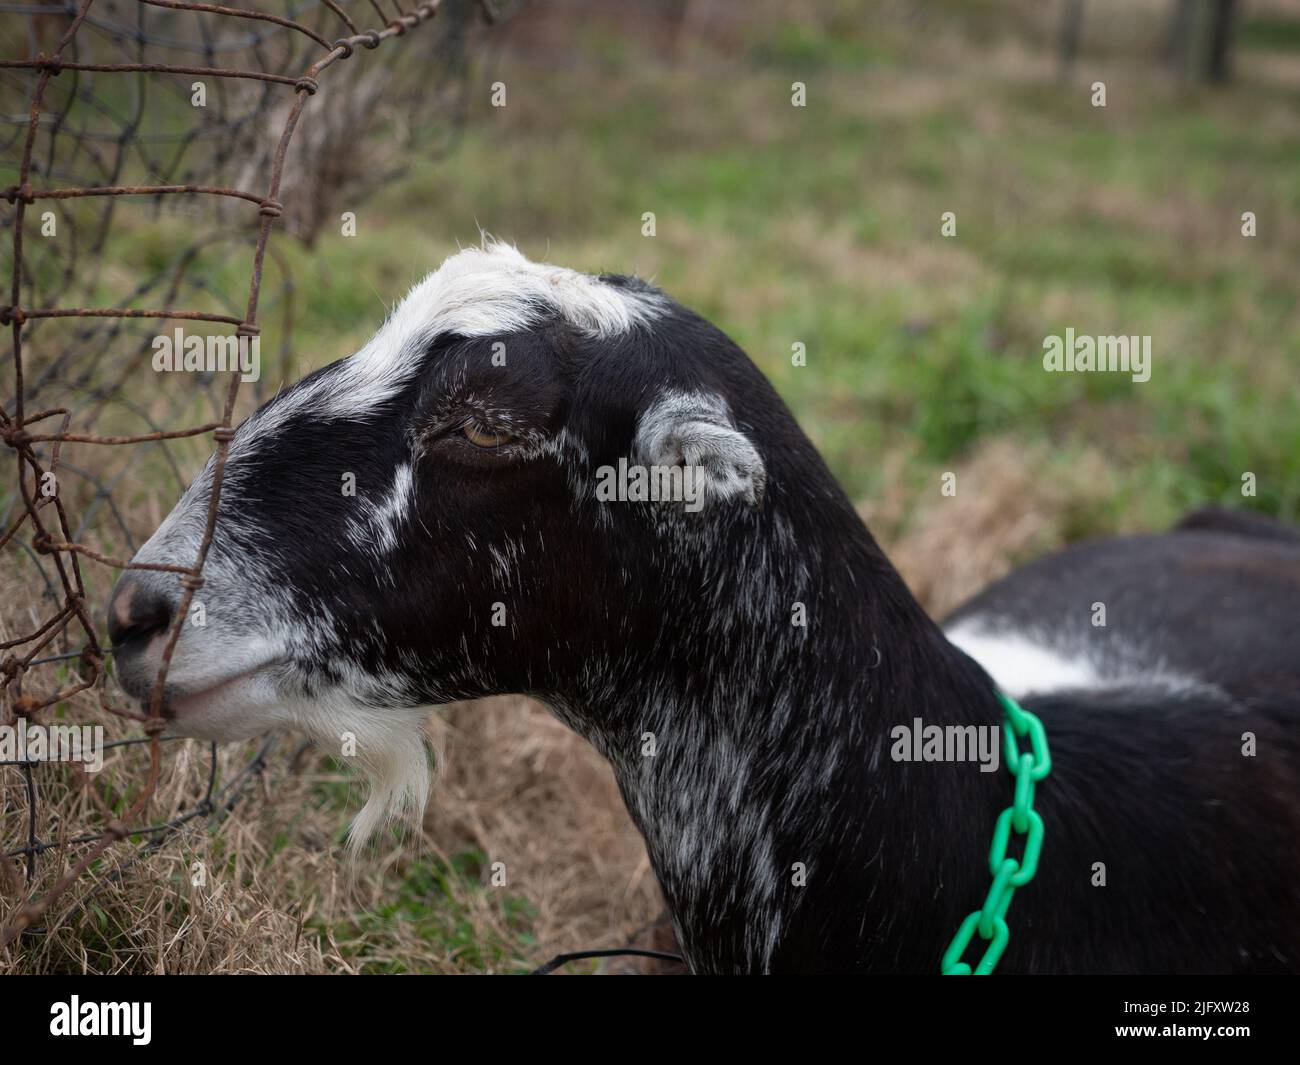 Black and White Nubian doe goat wearing a green collar looking for feed. Photographed close up in profile. Stock Photo